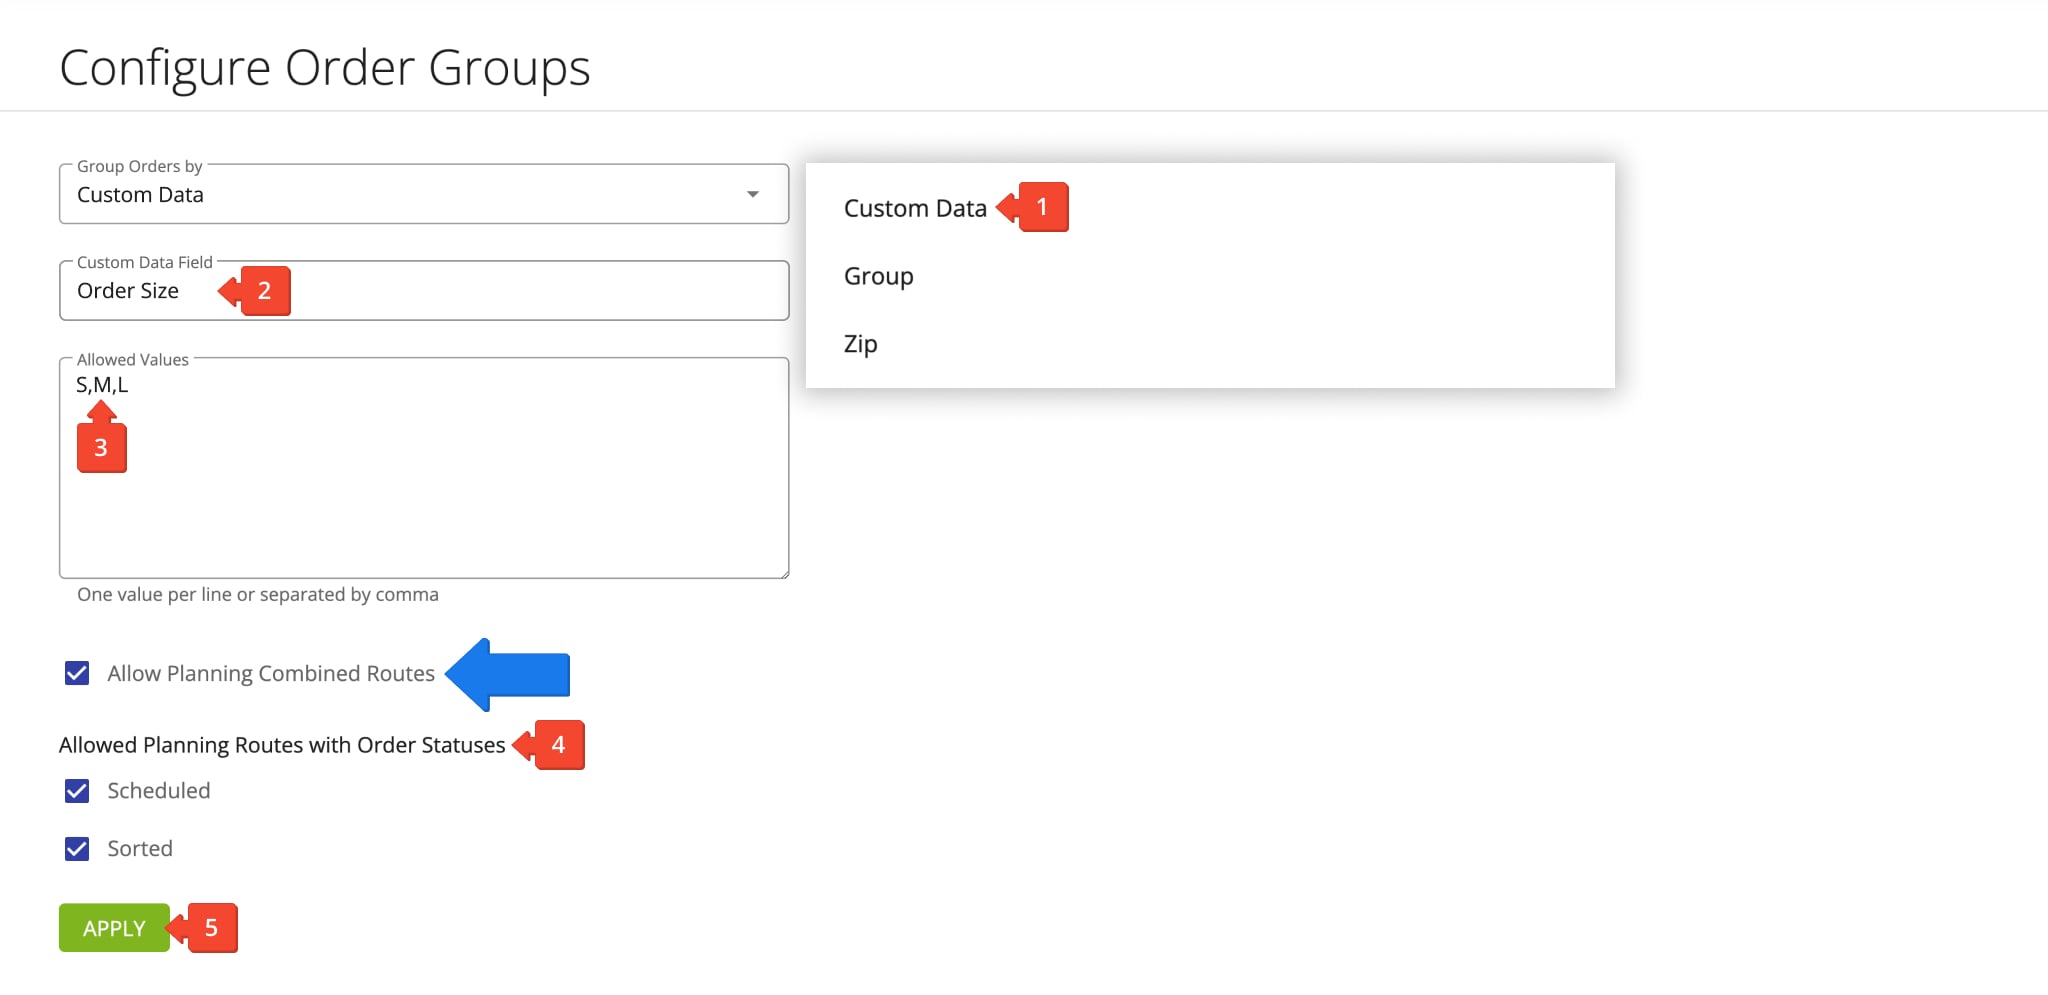 Group orders by Custom Data values to create custom Order Groups for recurring route planning.